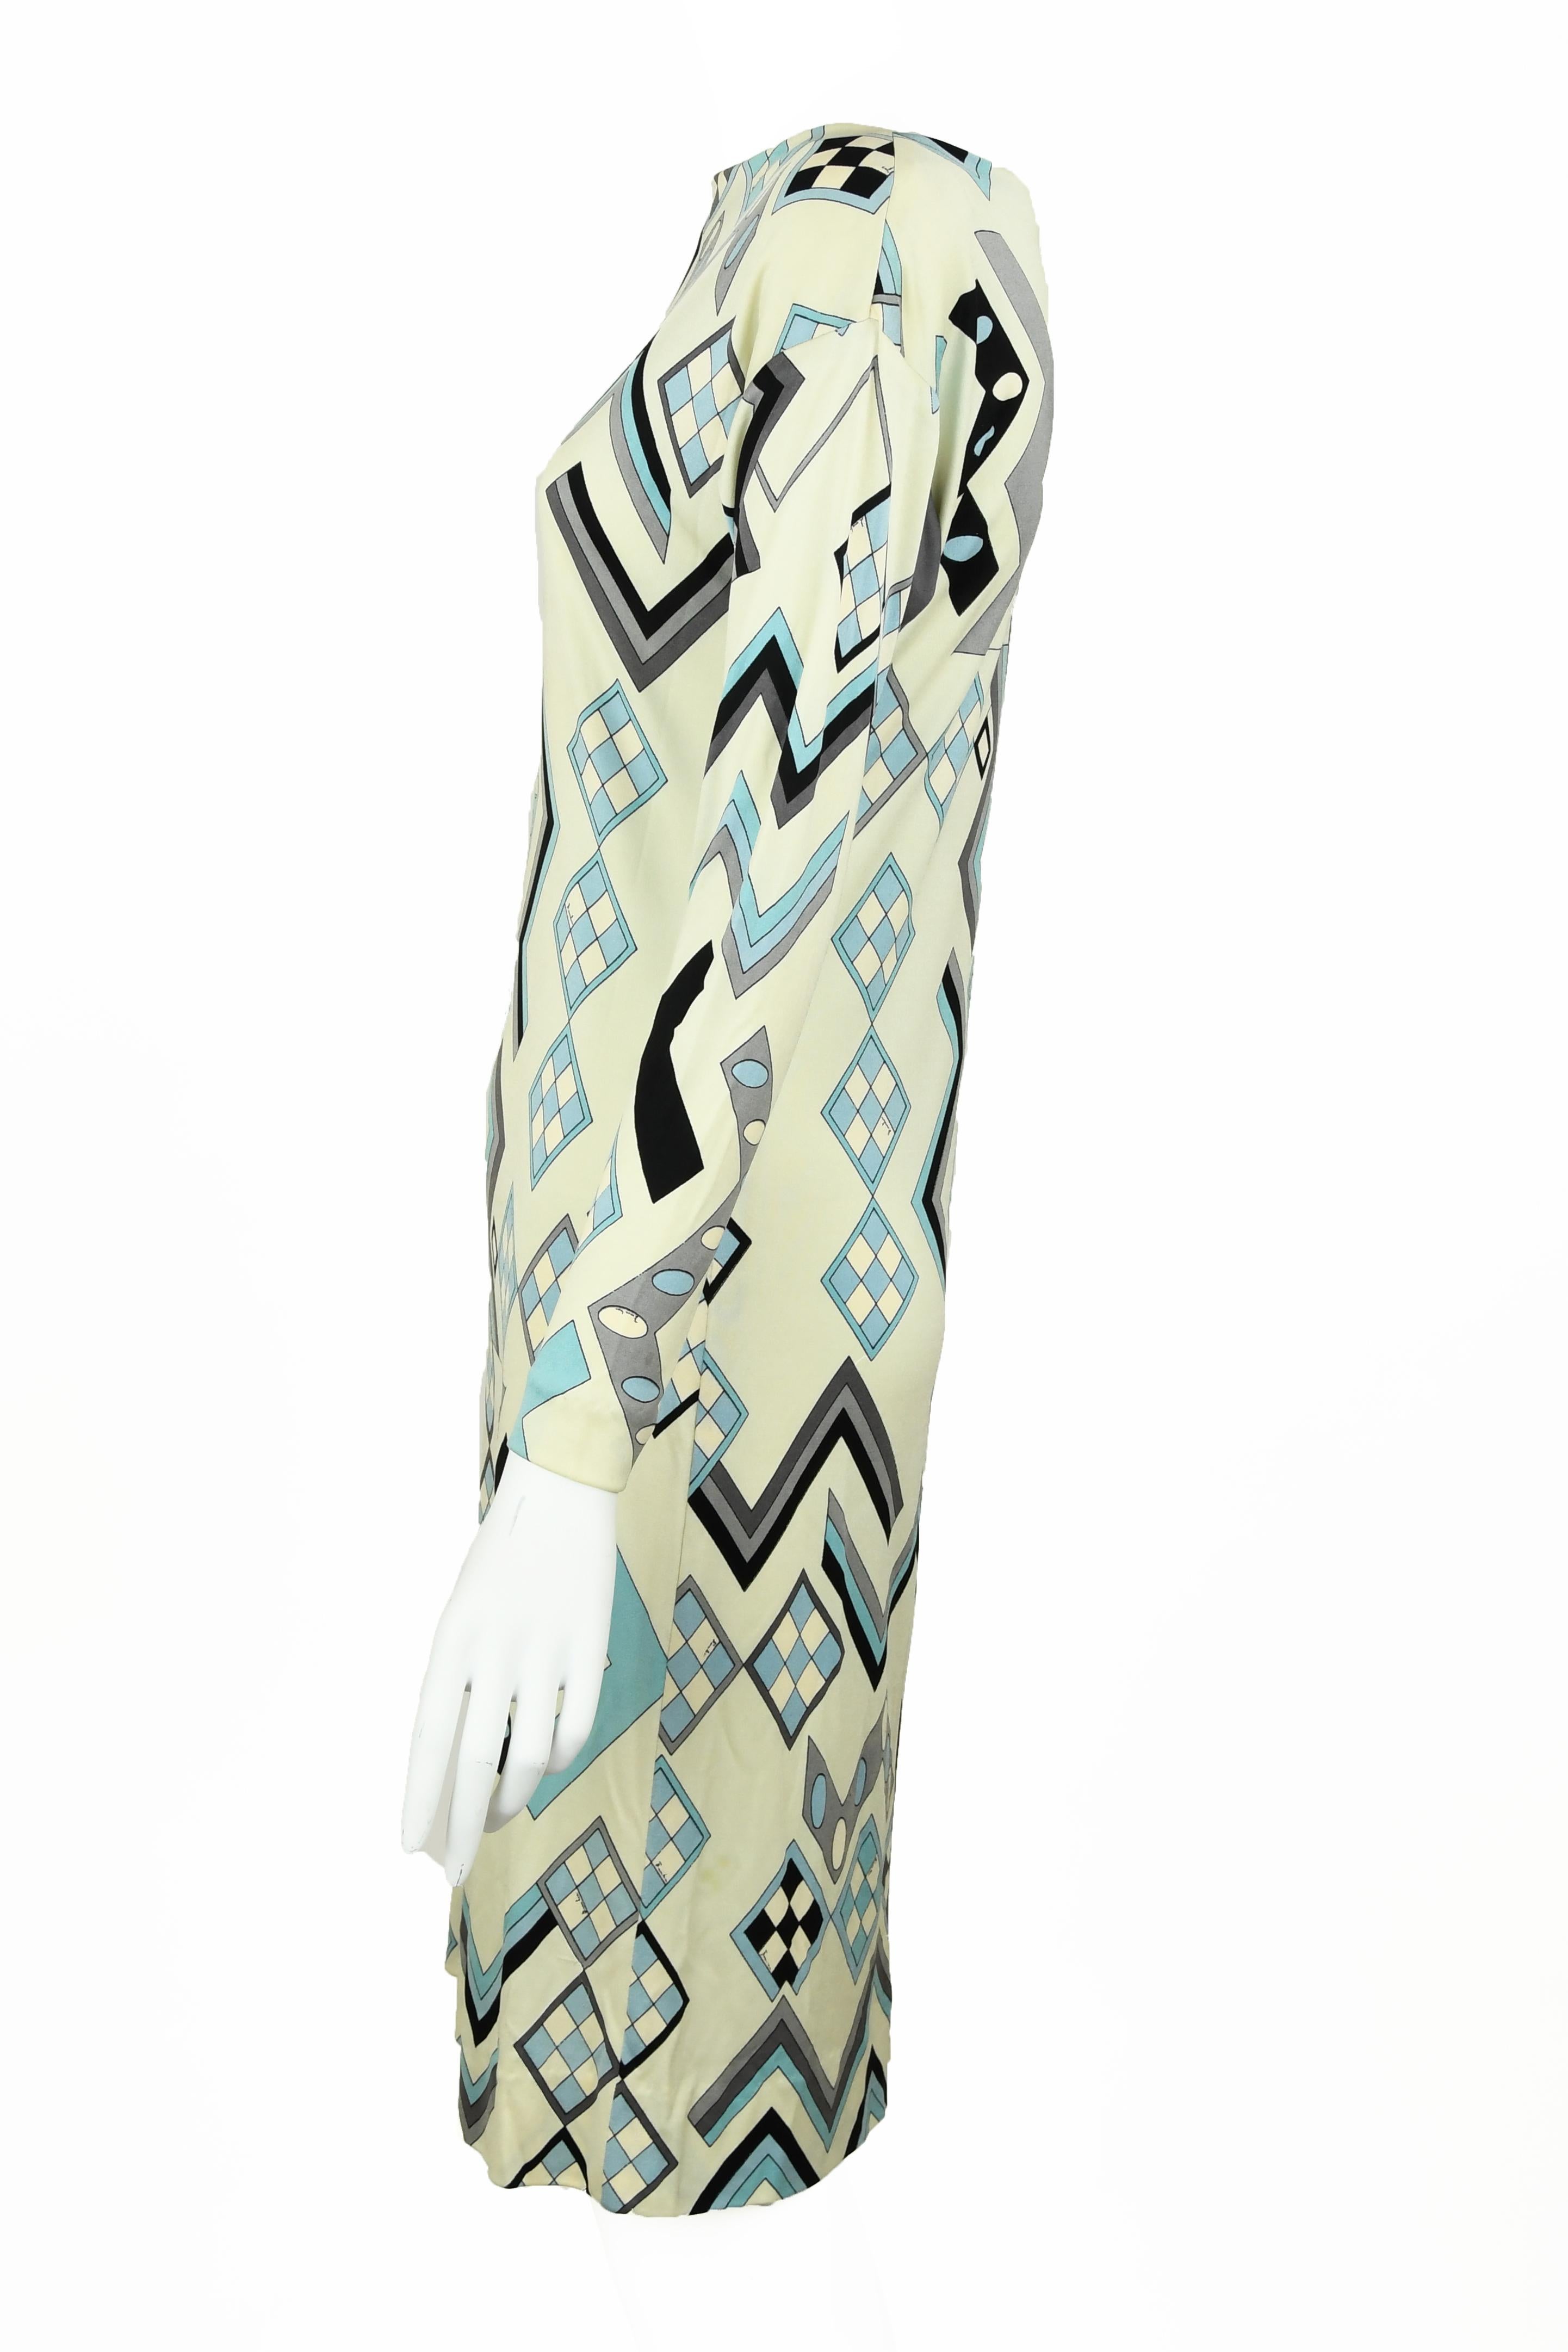 Vintage Pucci Off White, Blue & Gray Silk Jersey Dress - Size 2/4 In Excellent Condition For Sale In Newport, RI